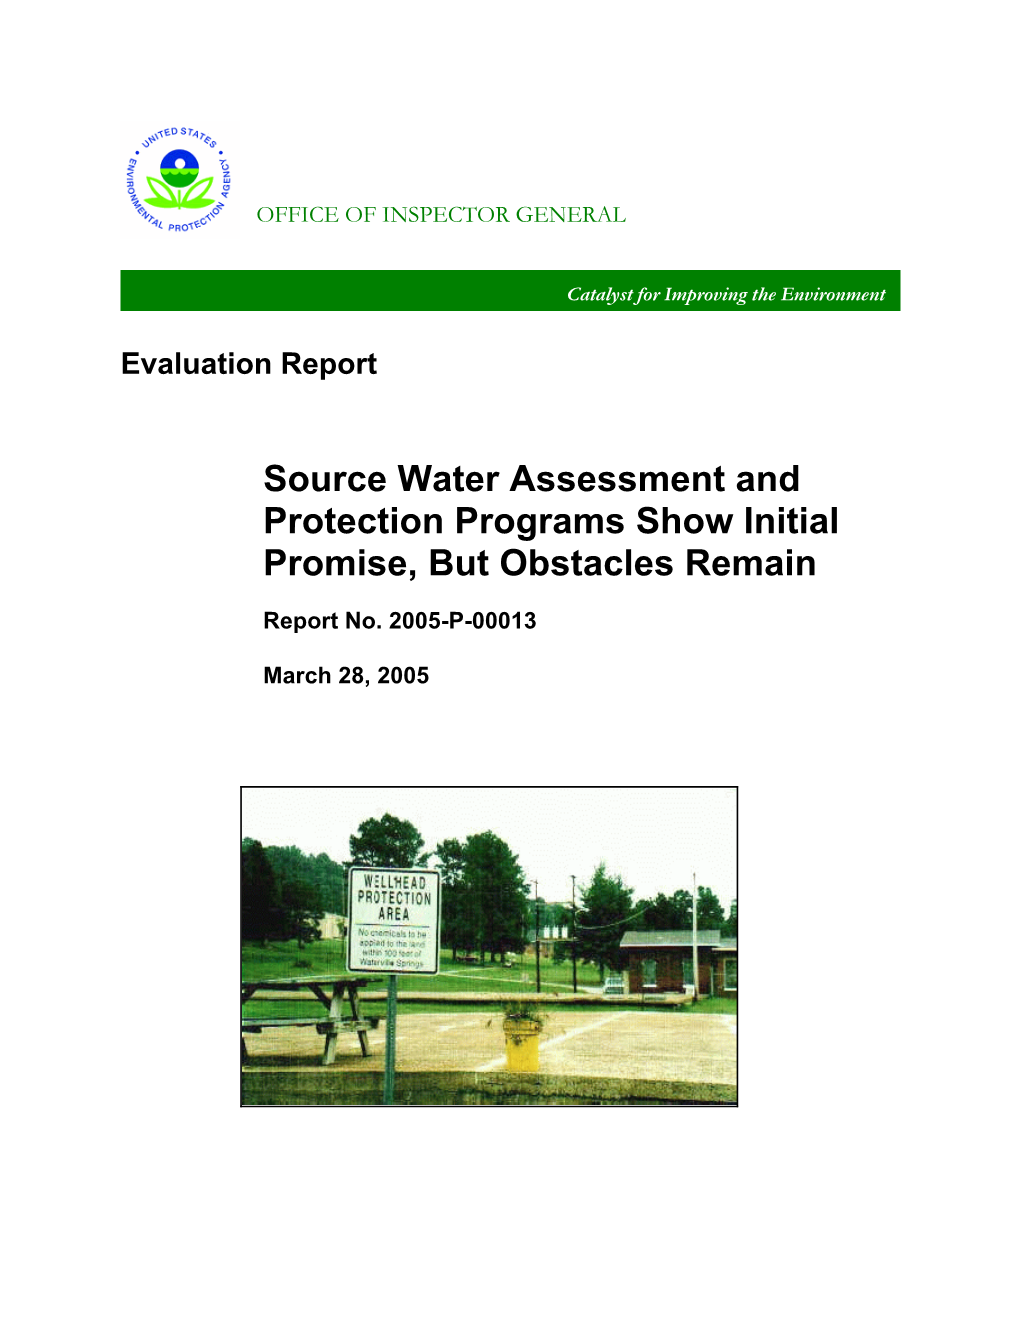 Source Water Assessment and Protection Programs Show Initial Promise, but Obstacles Remain